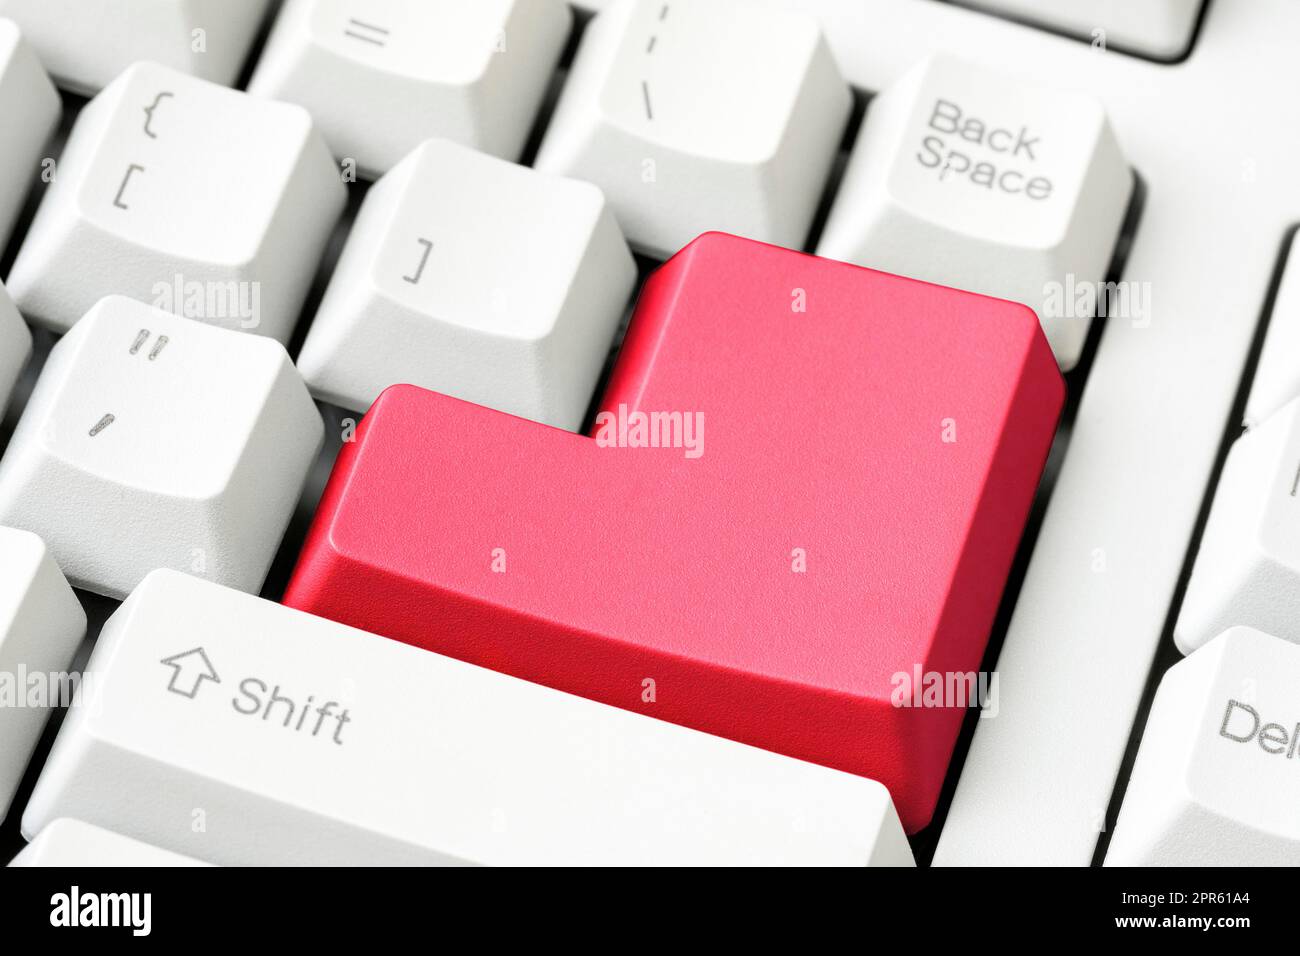 Blank red button on the keyboard close-up Stock Photo